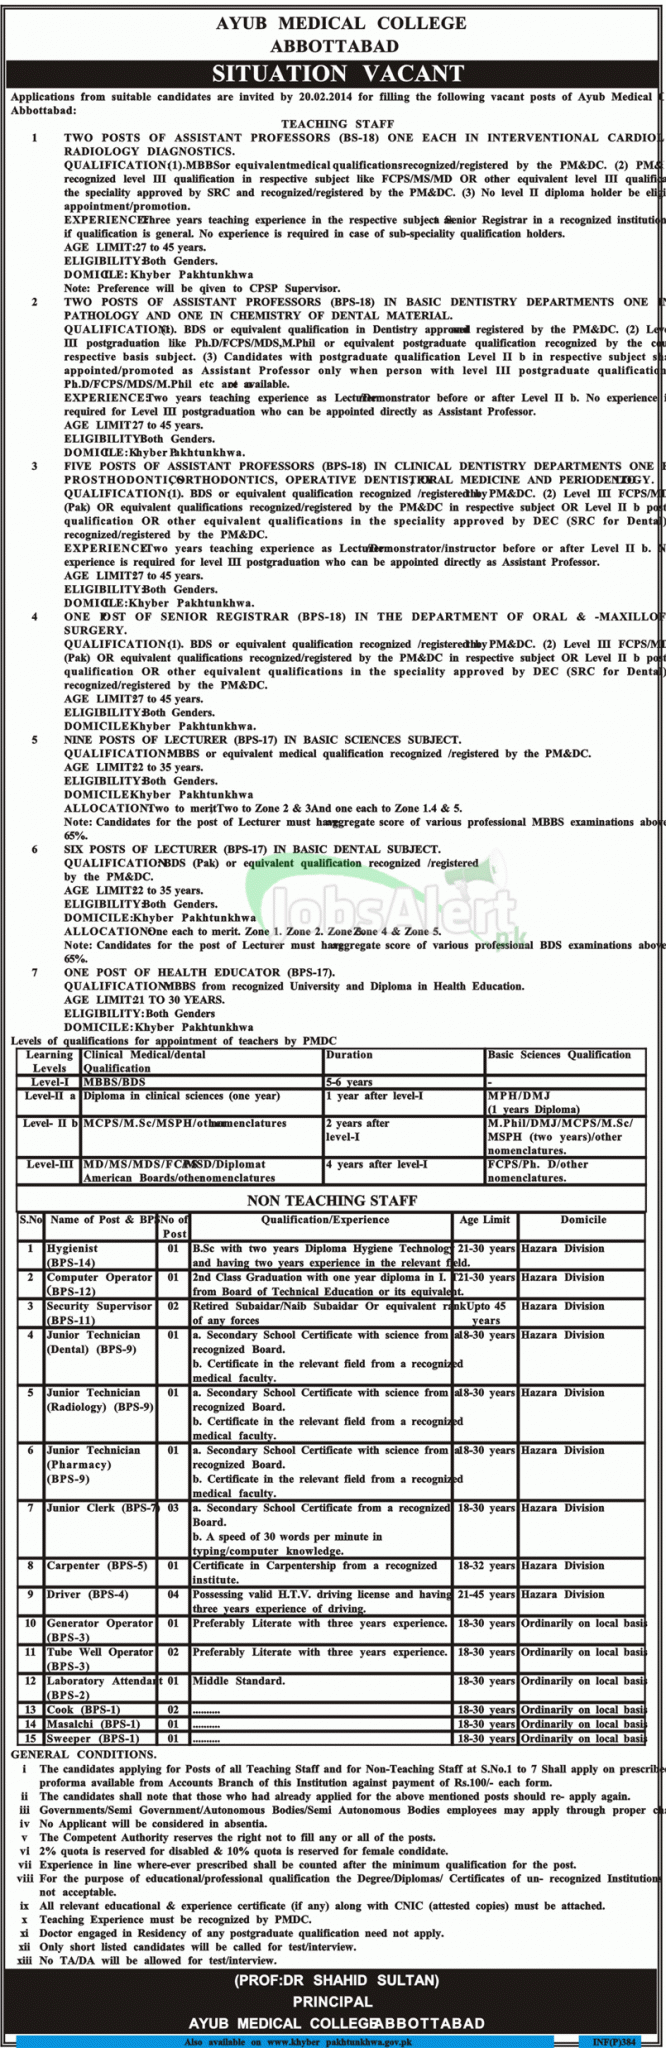 Government Jobs 2014 in Ayub Medical College Abbottabad